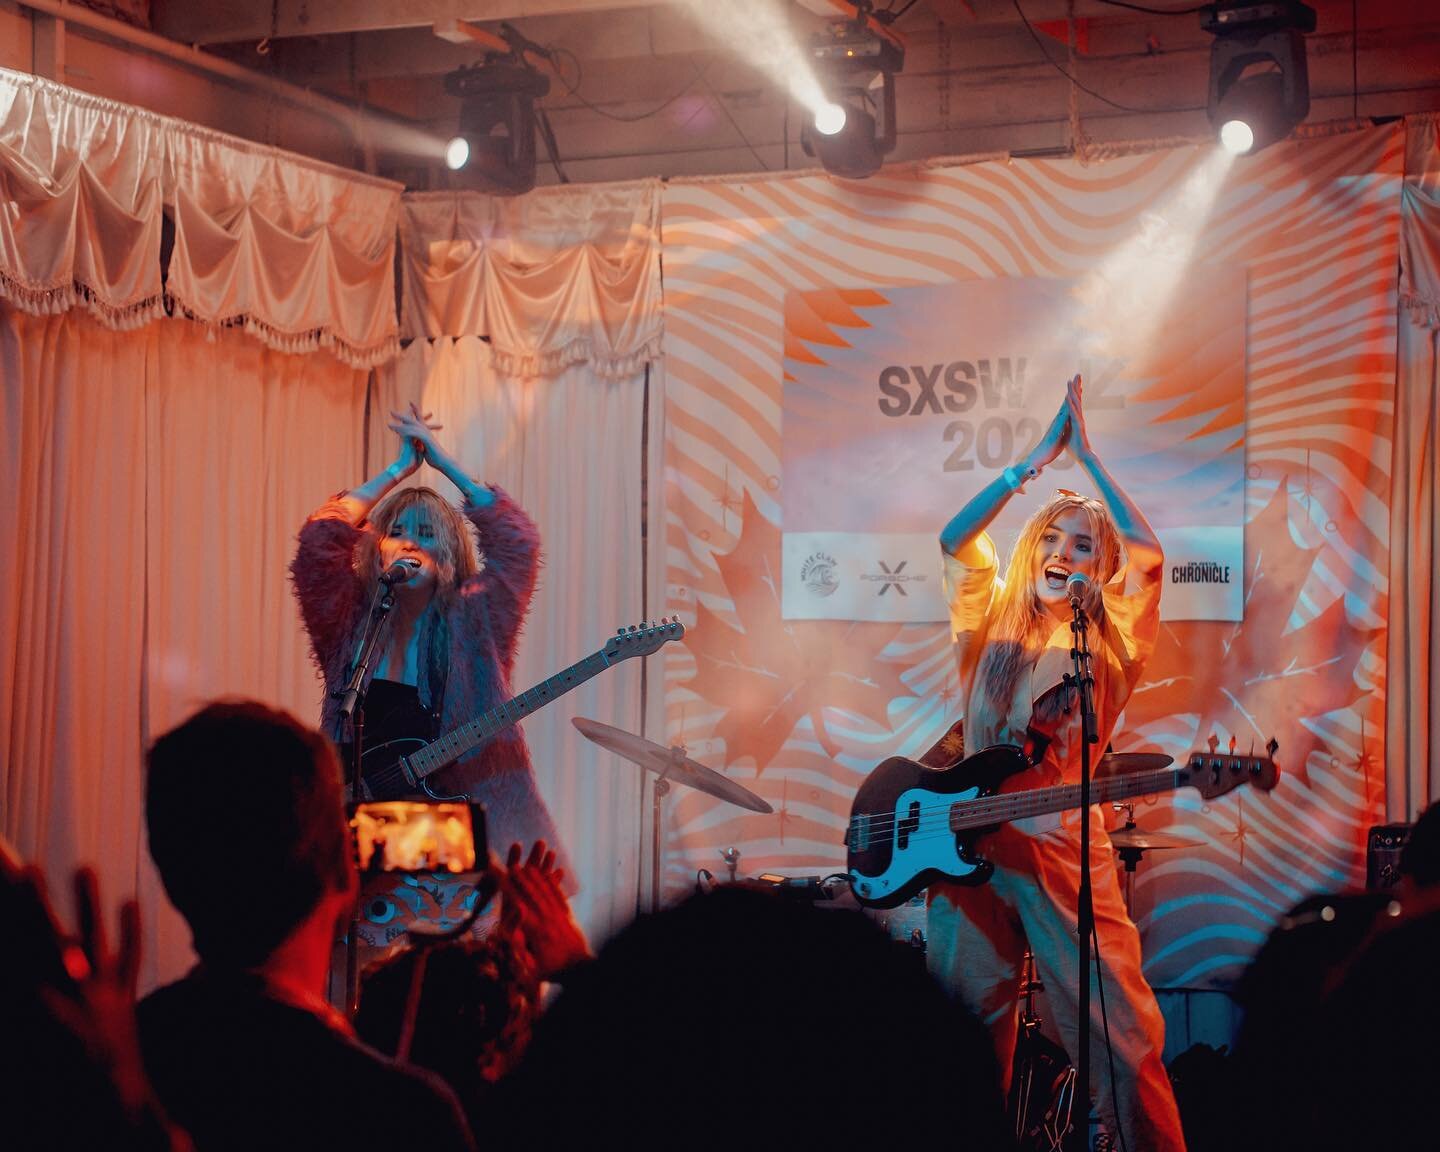 LA we&rsquo;re gonna be in ya again!! Come see us play an acoustic set @barlubitsch for the super sweet @wfnm showcase with some other fab up and coming artists ❤️ link in our story to RSVP 🙌🏻

📸 @capitalcityshots 
🎥 @thrumylazyeye